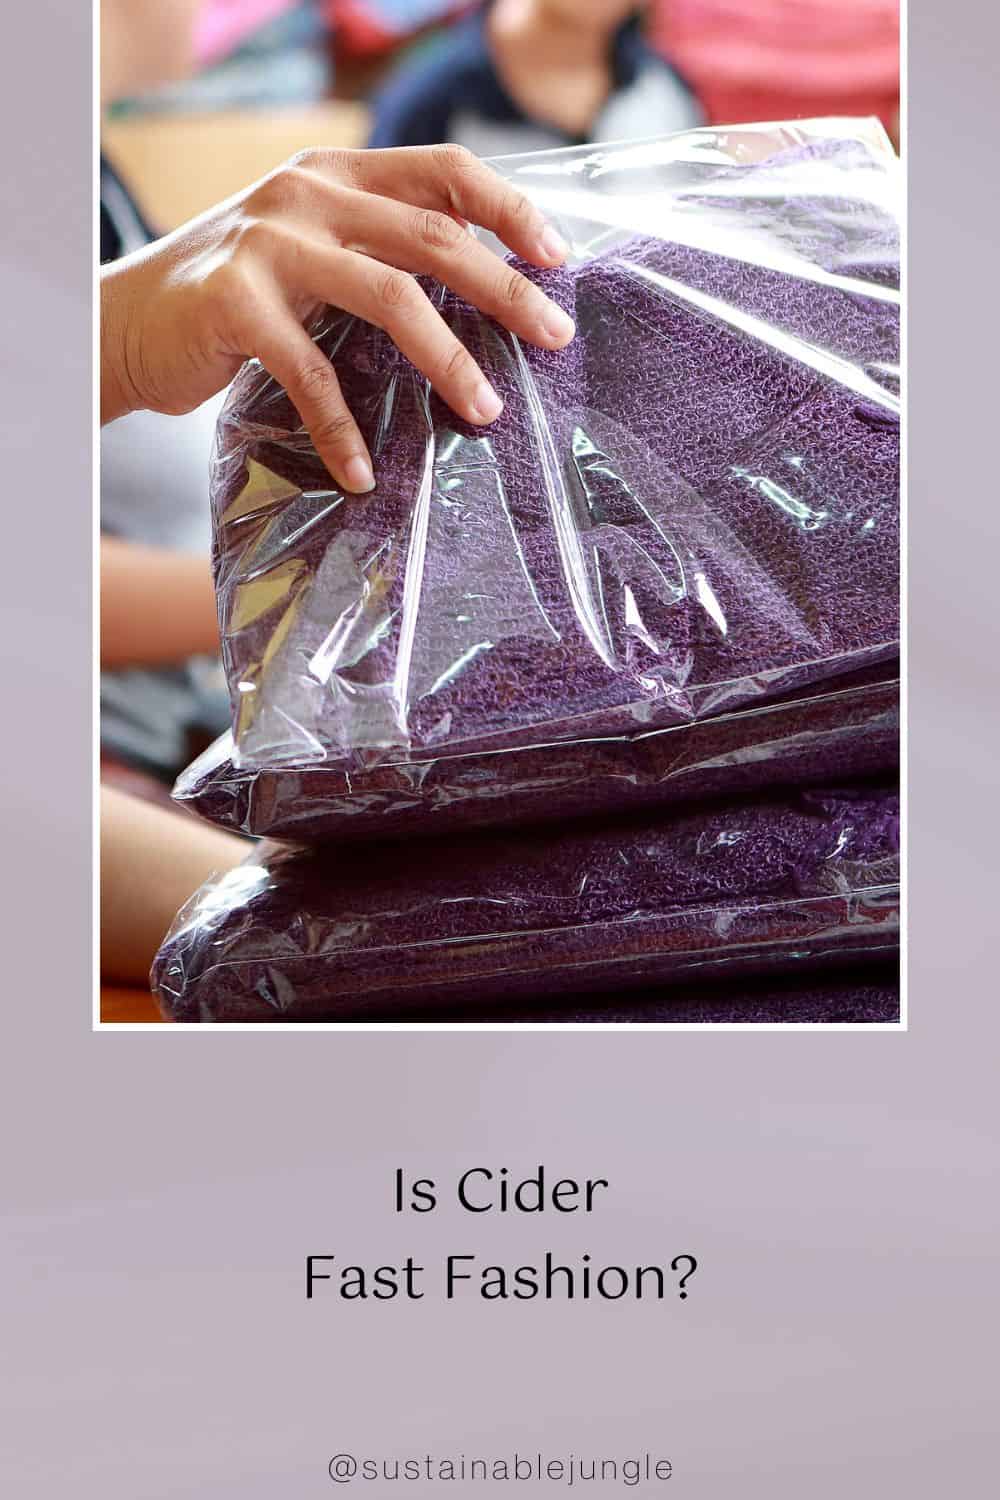 Is Cider Fast Fashion? Image by odua images #isciderfastfashion #isciderlegit #isciderethical #ciderethics #ciderclothing #ciderclothingfastfashion #sustainablejungle